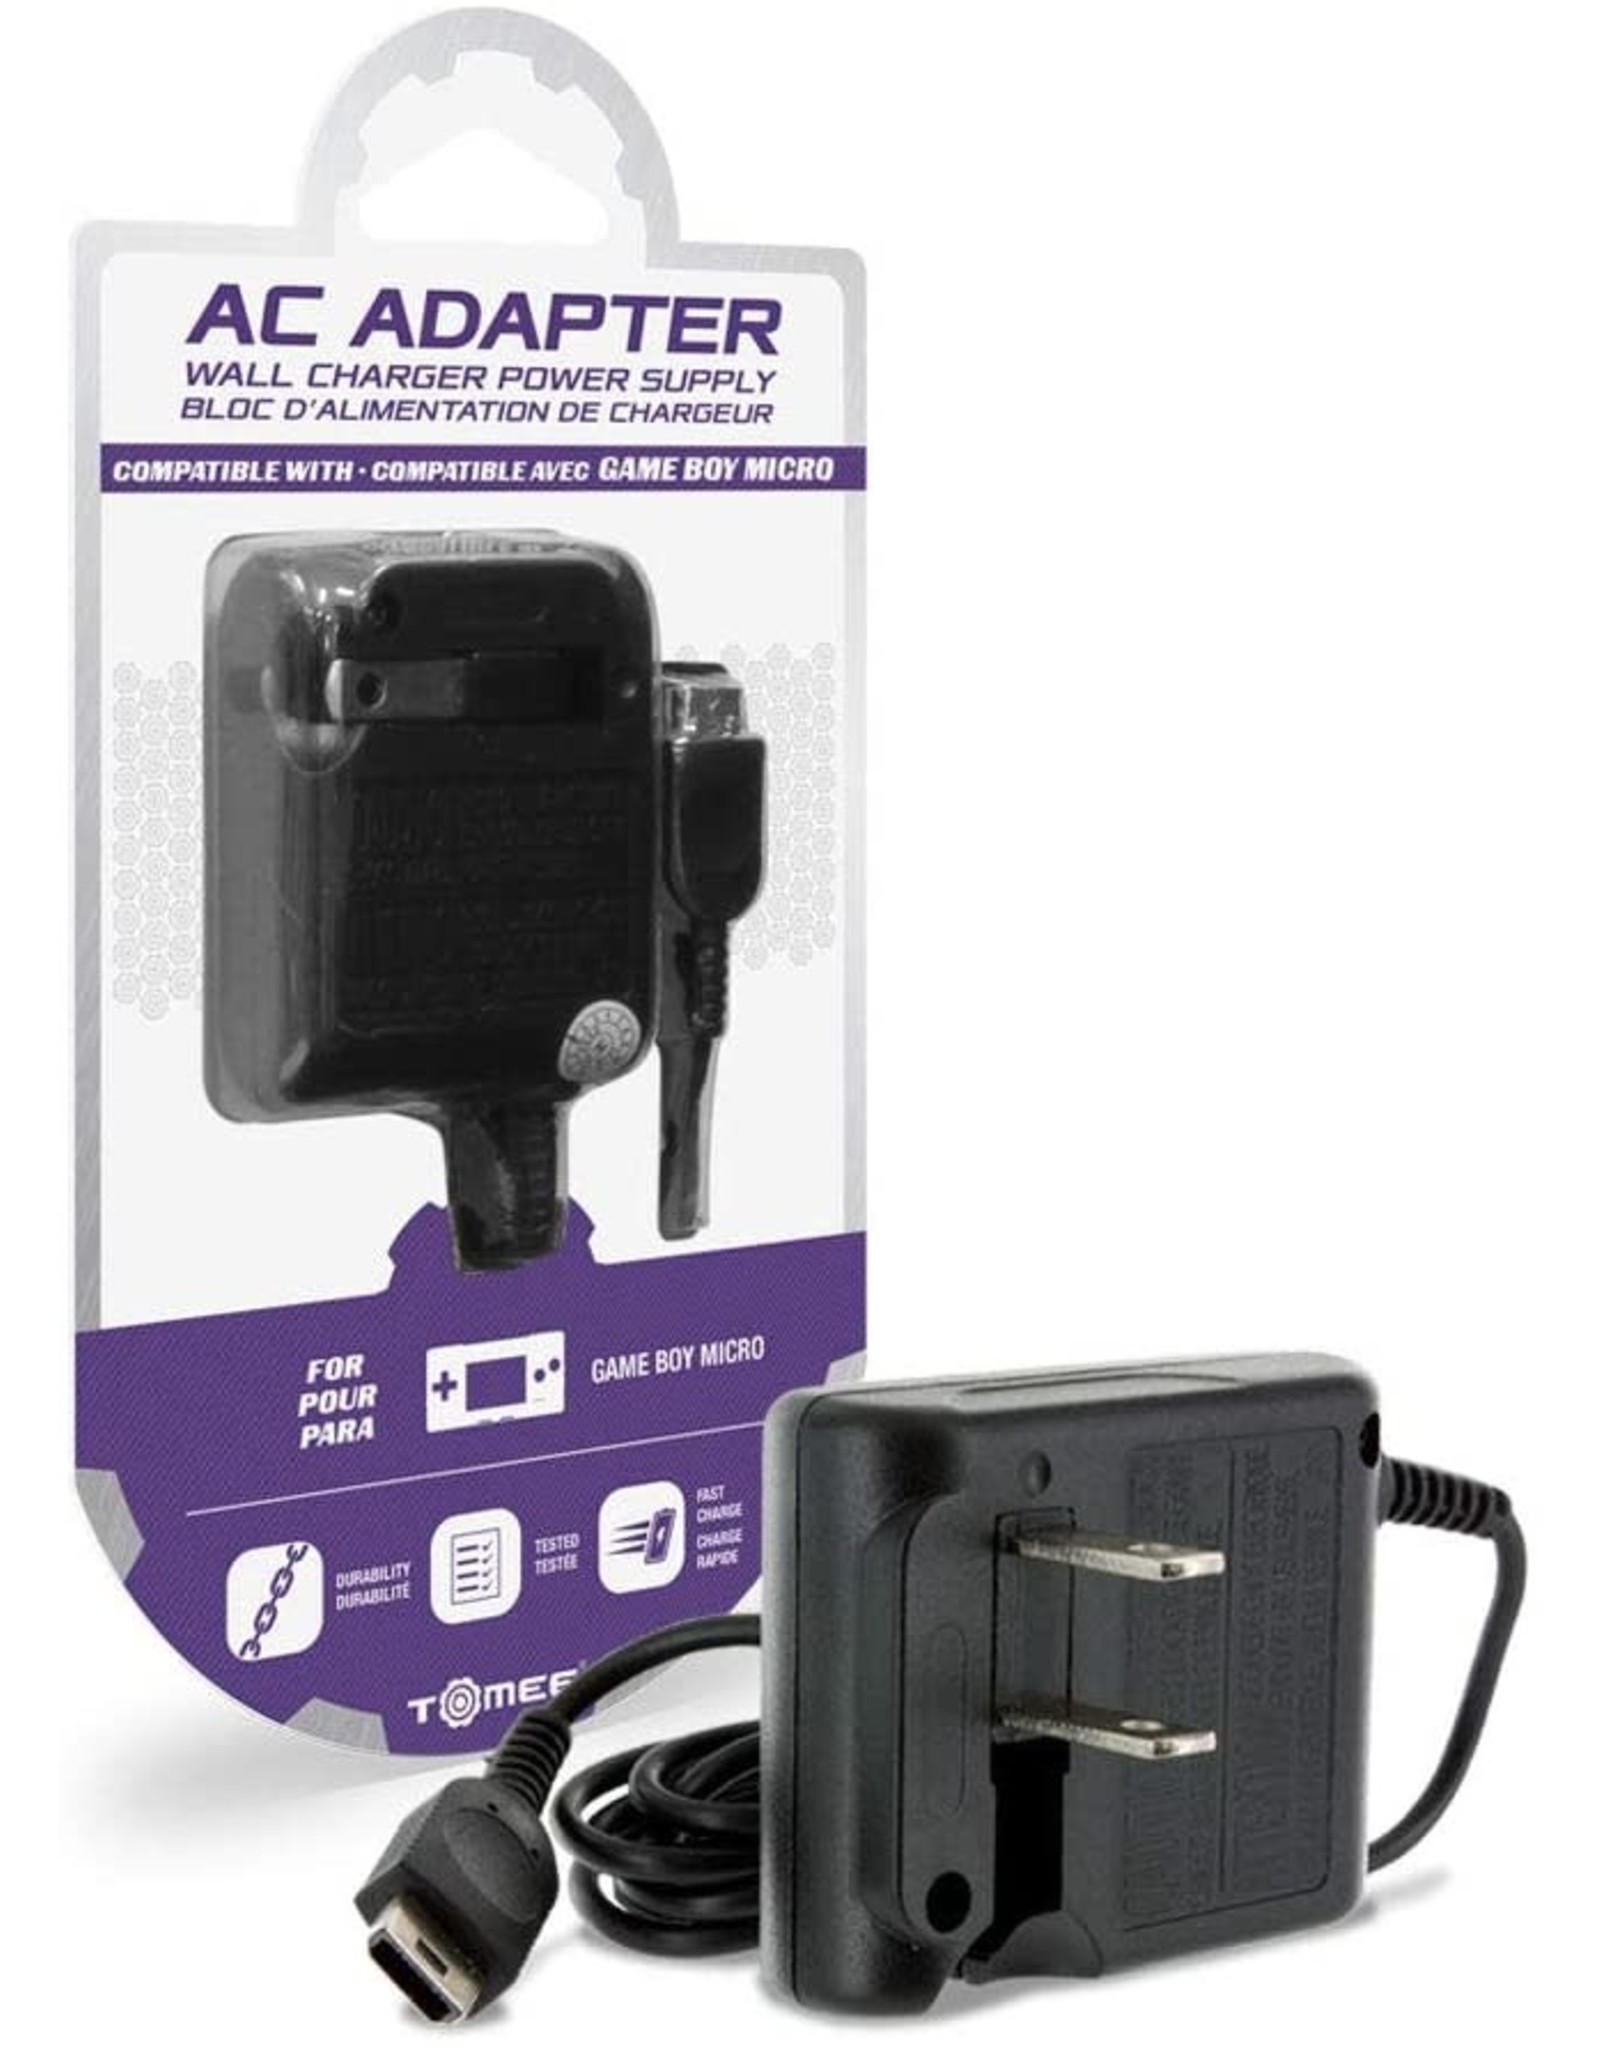 Game Boy Advance Nintendo Gameboy Micro AC Power Adapter (Tomee)